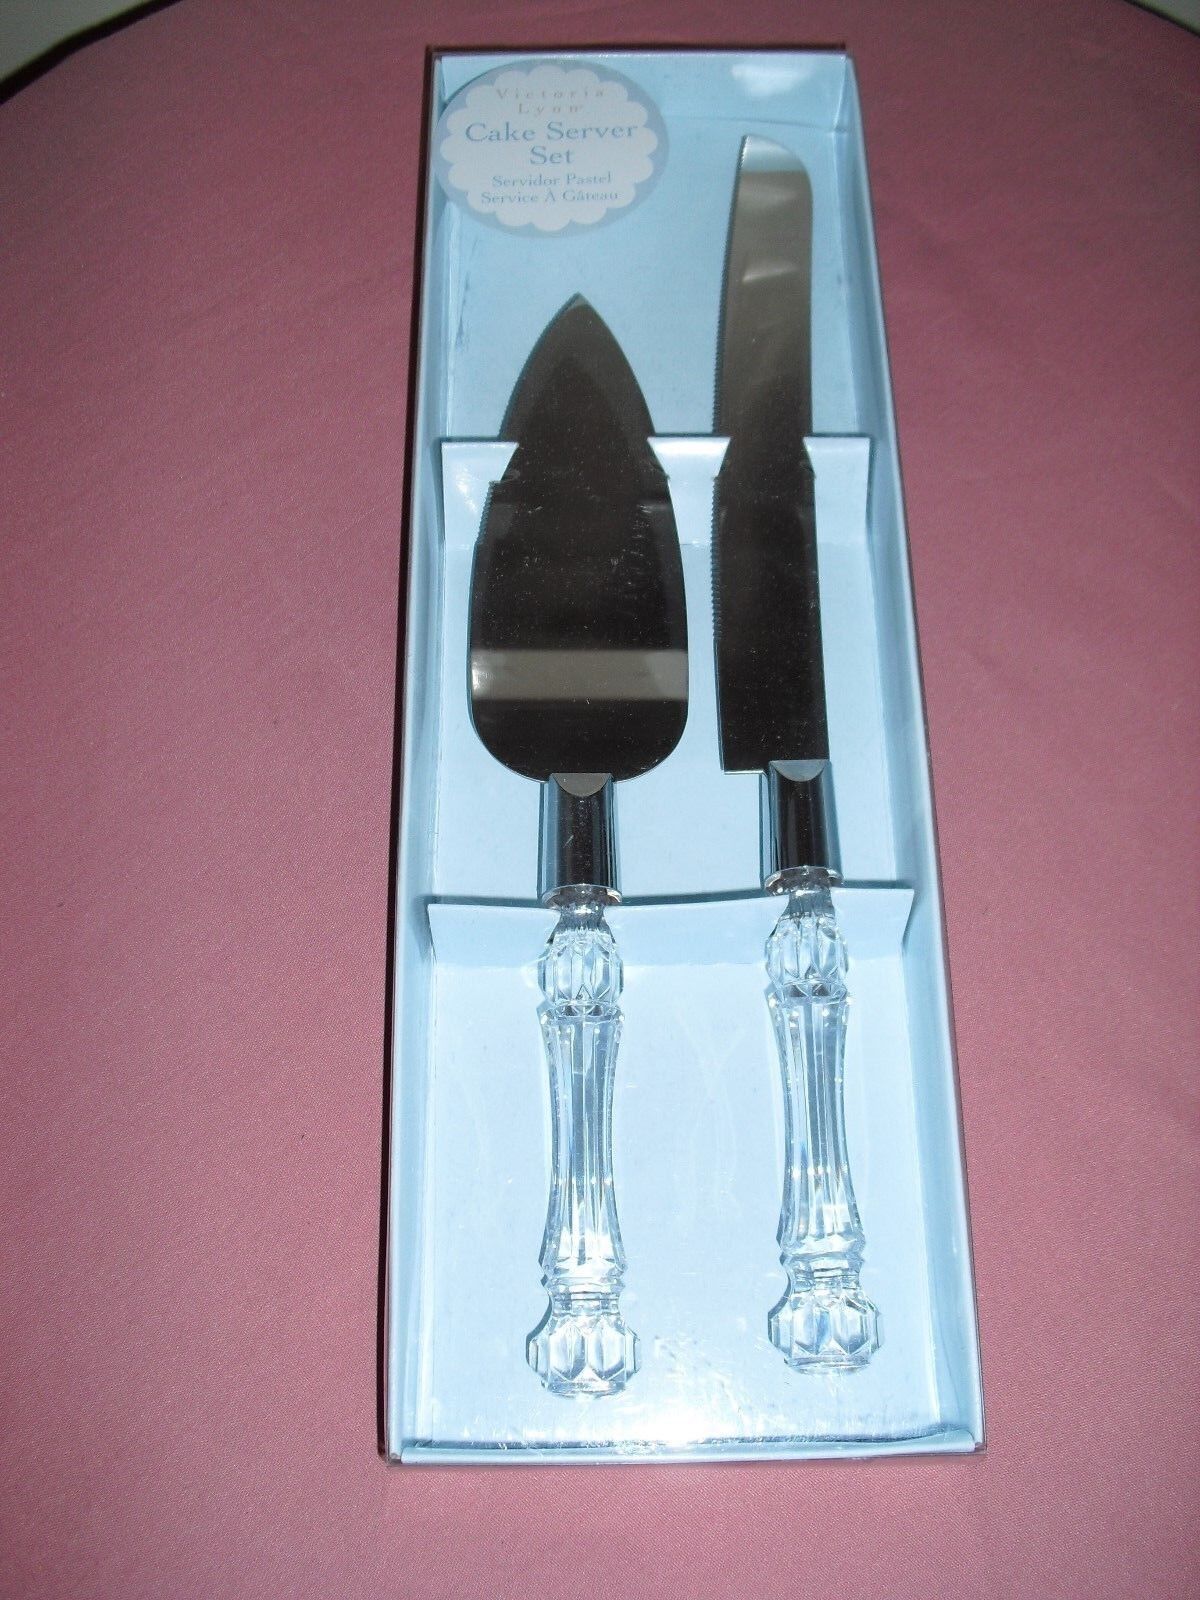 VICTORIA LYNN Engraveable Cake Server Set - Faux Crystal Handle - New in Box